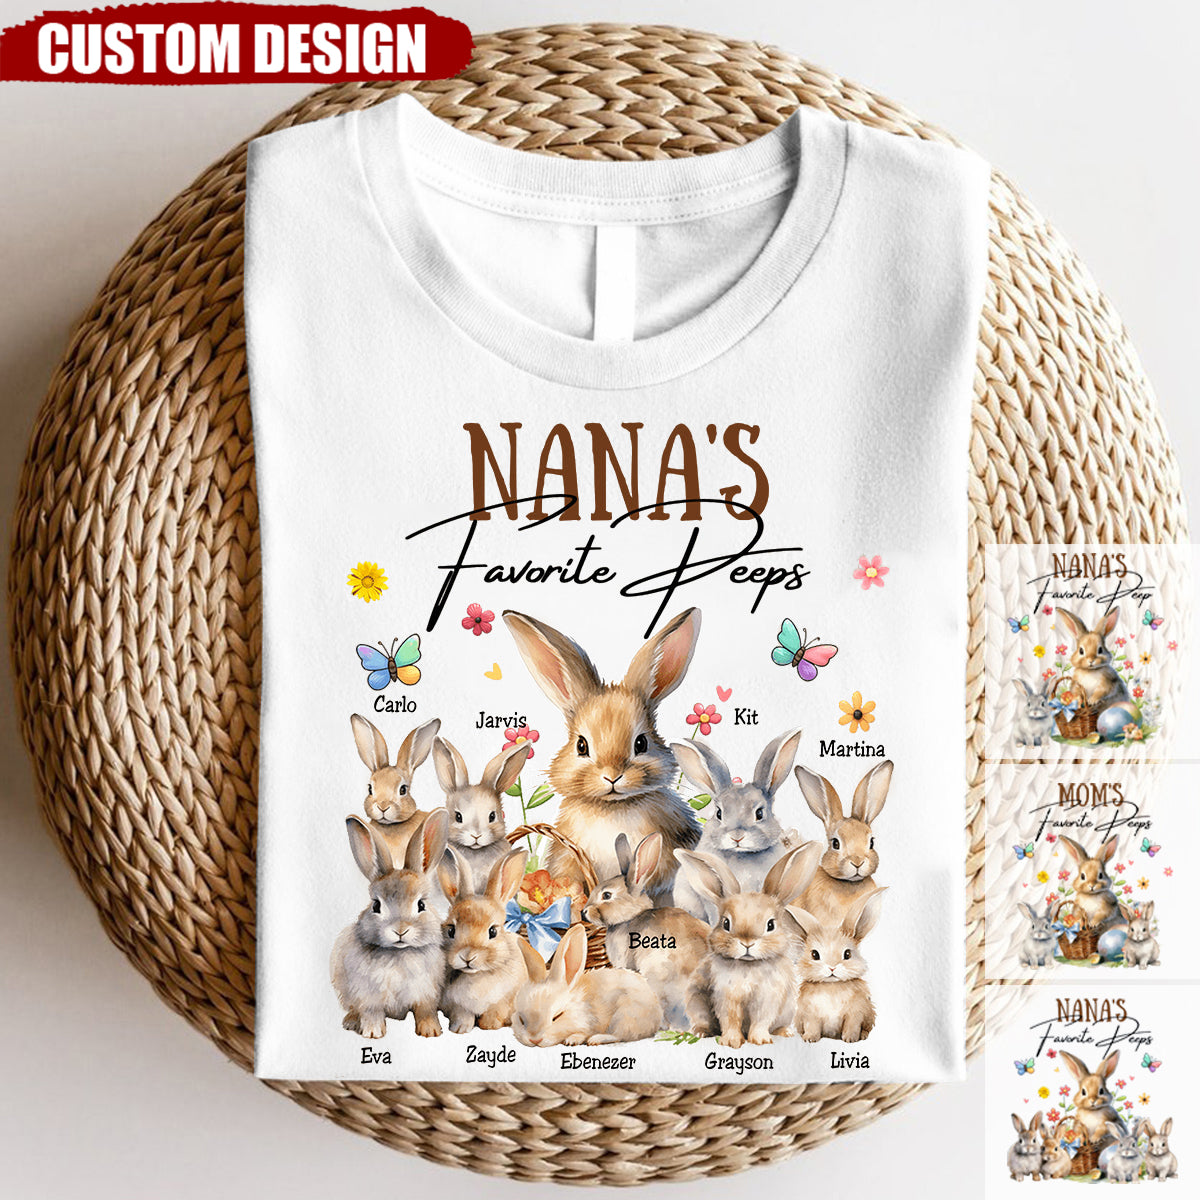 Grandma's/Mom's Favorite Easter Day Personalized shirt